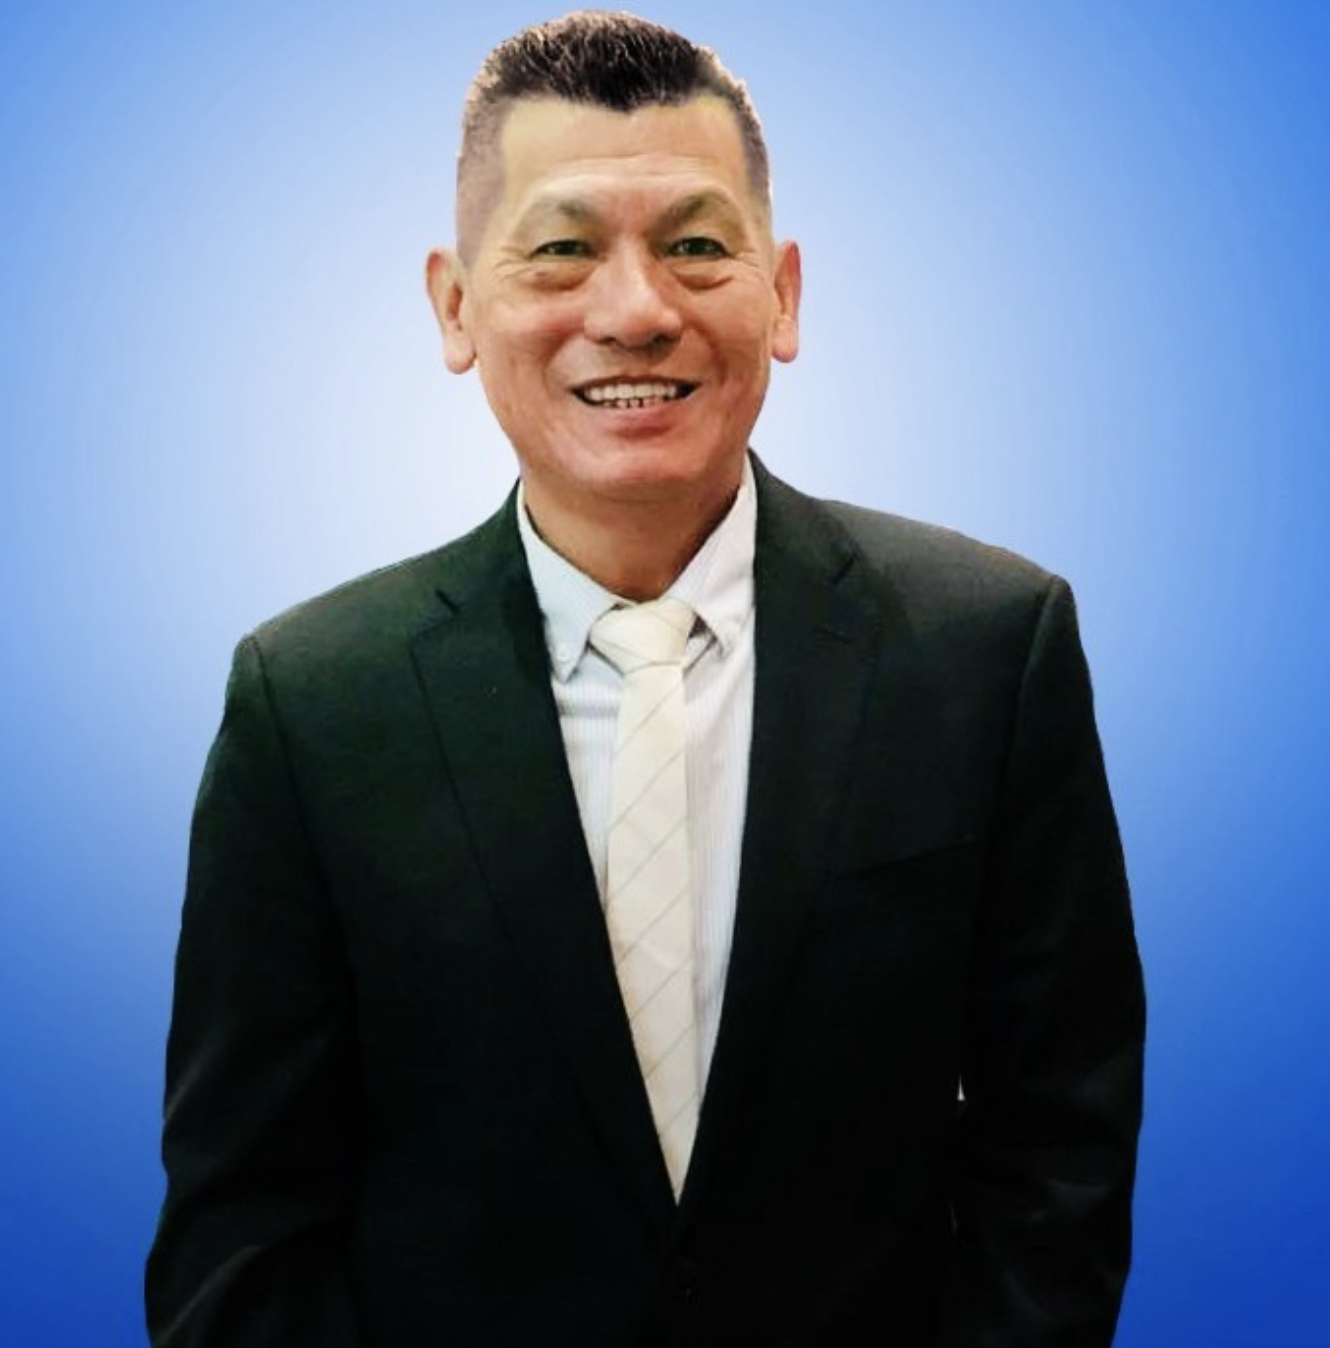 A photo of CFO Norman Son Kee, smiling, wearing a black suit, and standing in front of a blue background.